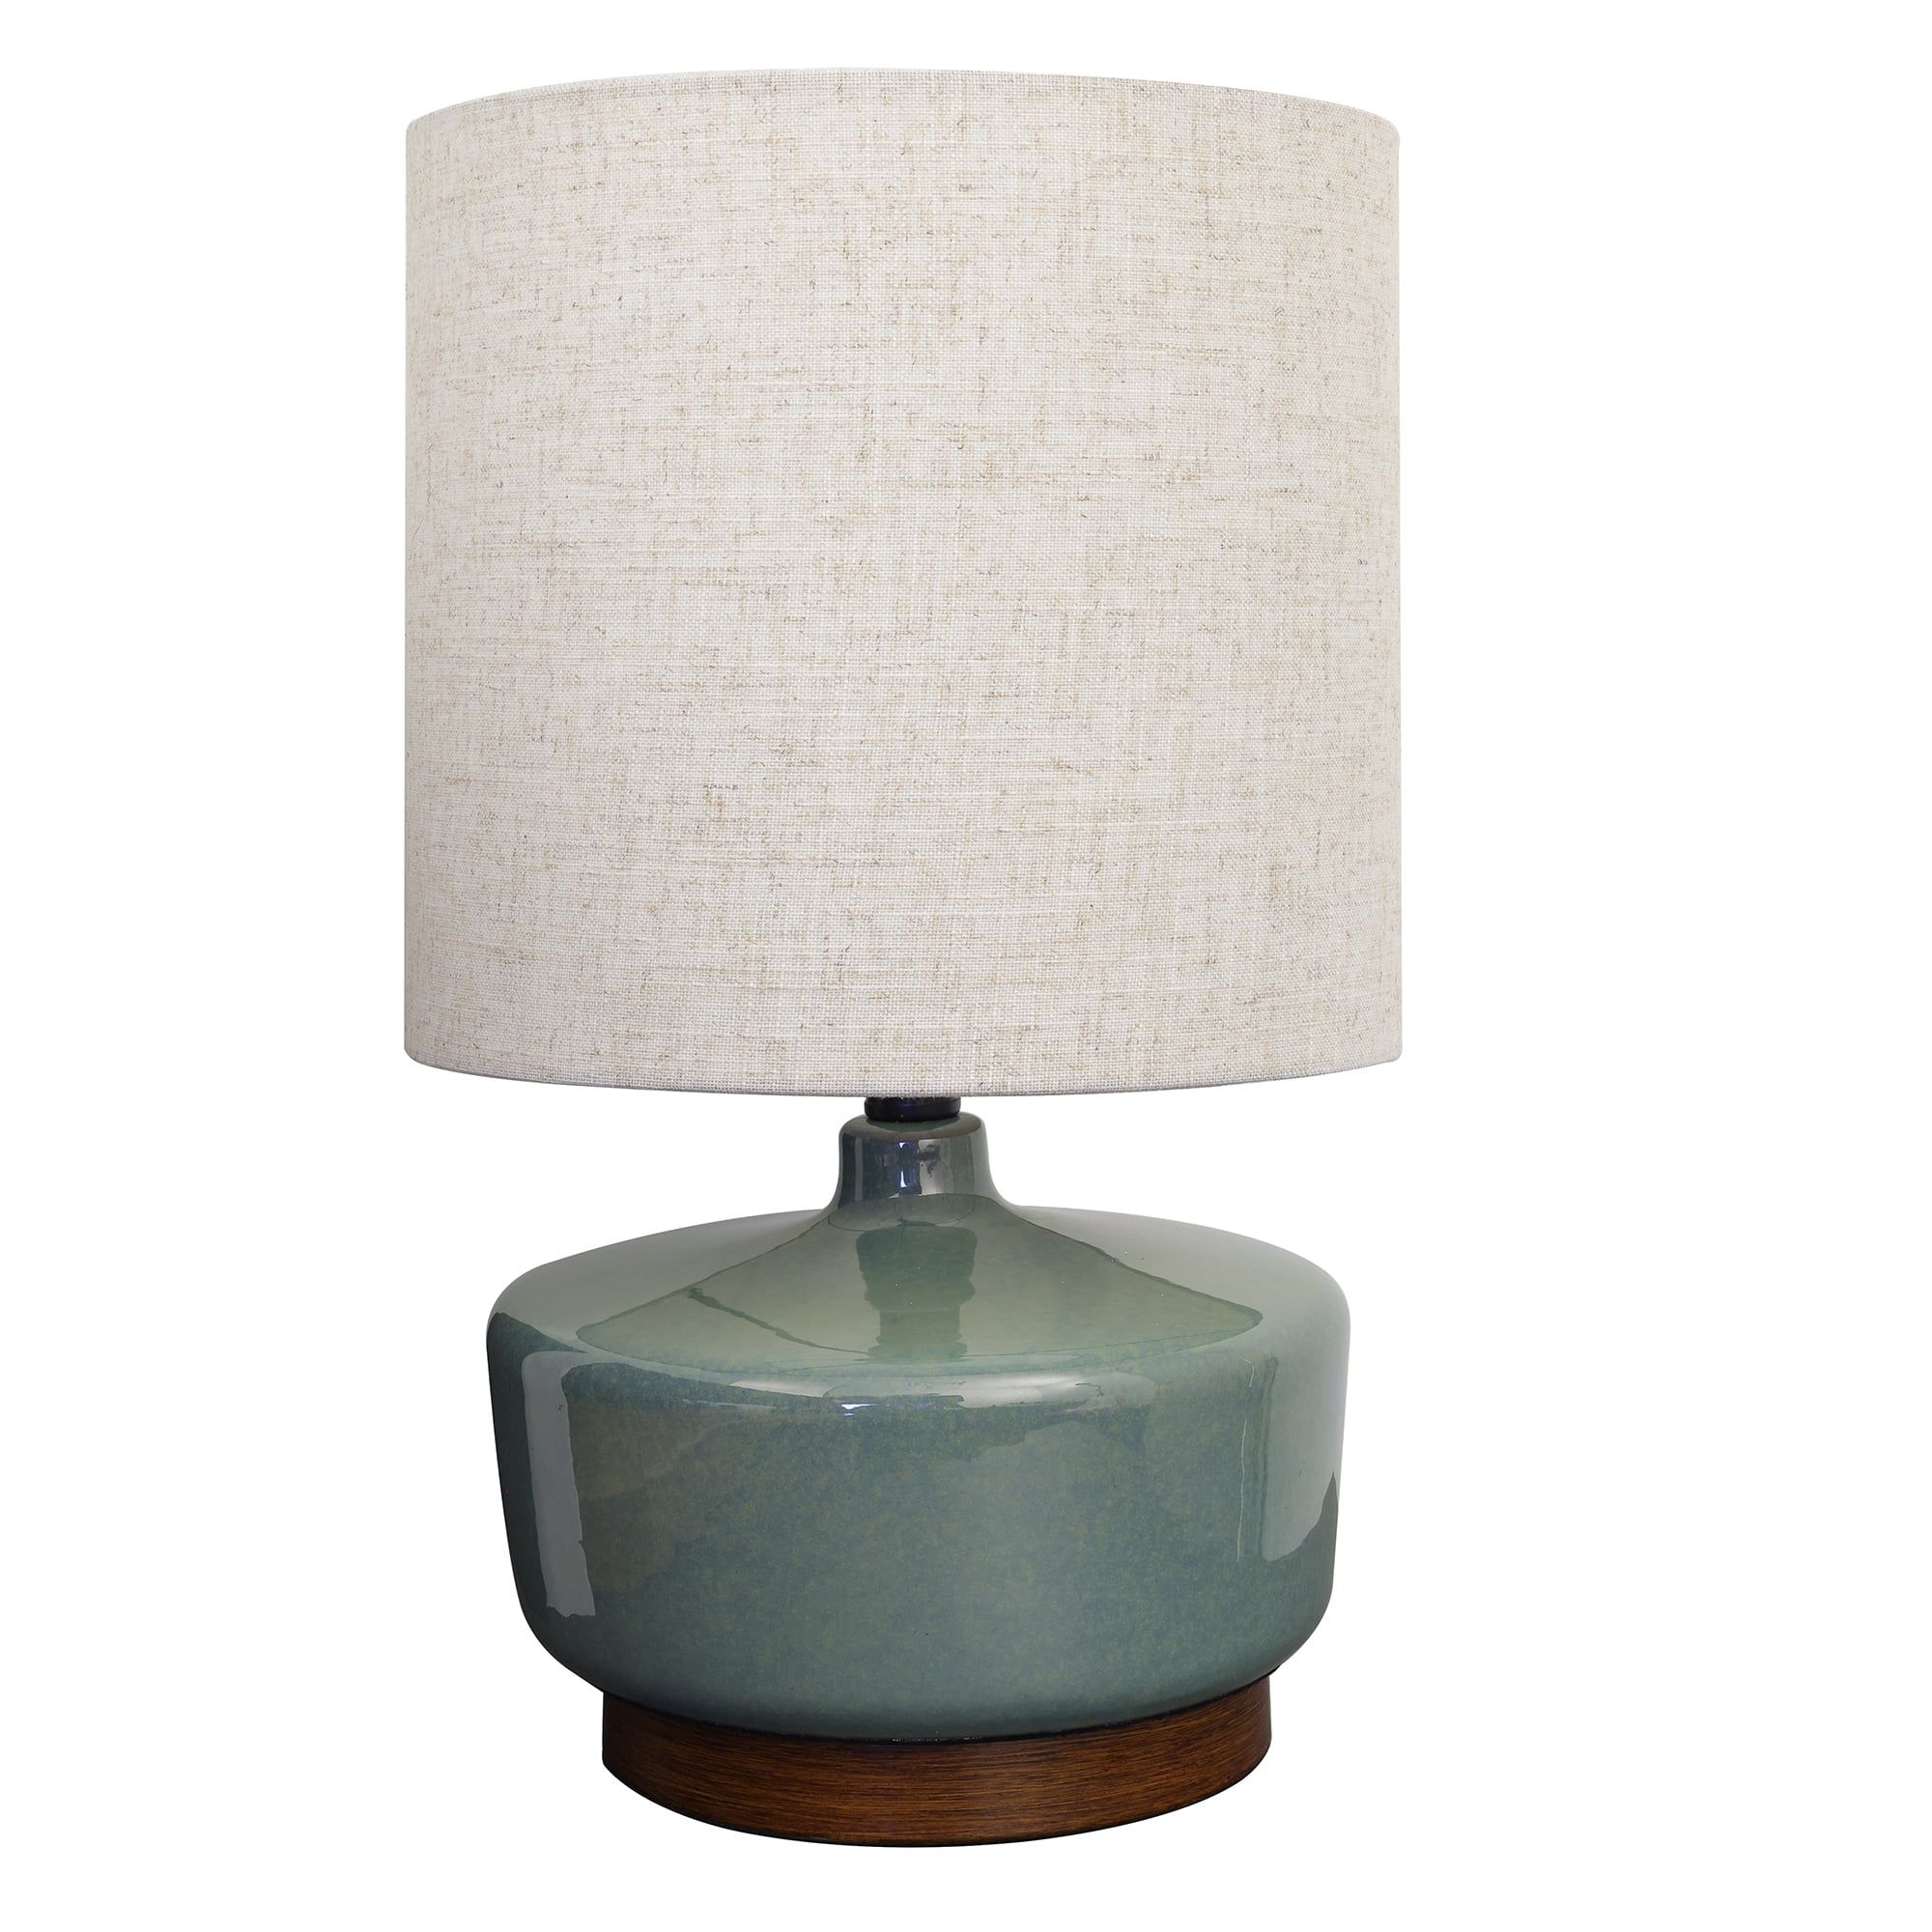 Better Homes & Gardens Modern Mid-Century Ceramic Table Lamp with Wood Base, 17"H | Walmart (US)